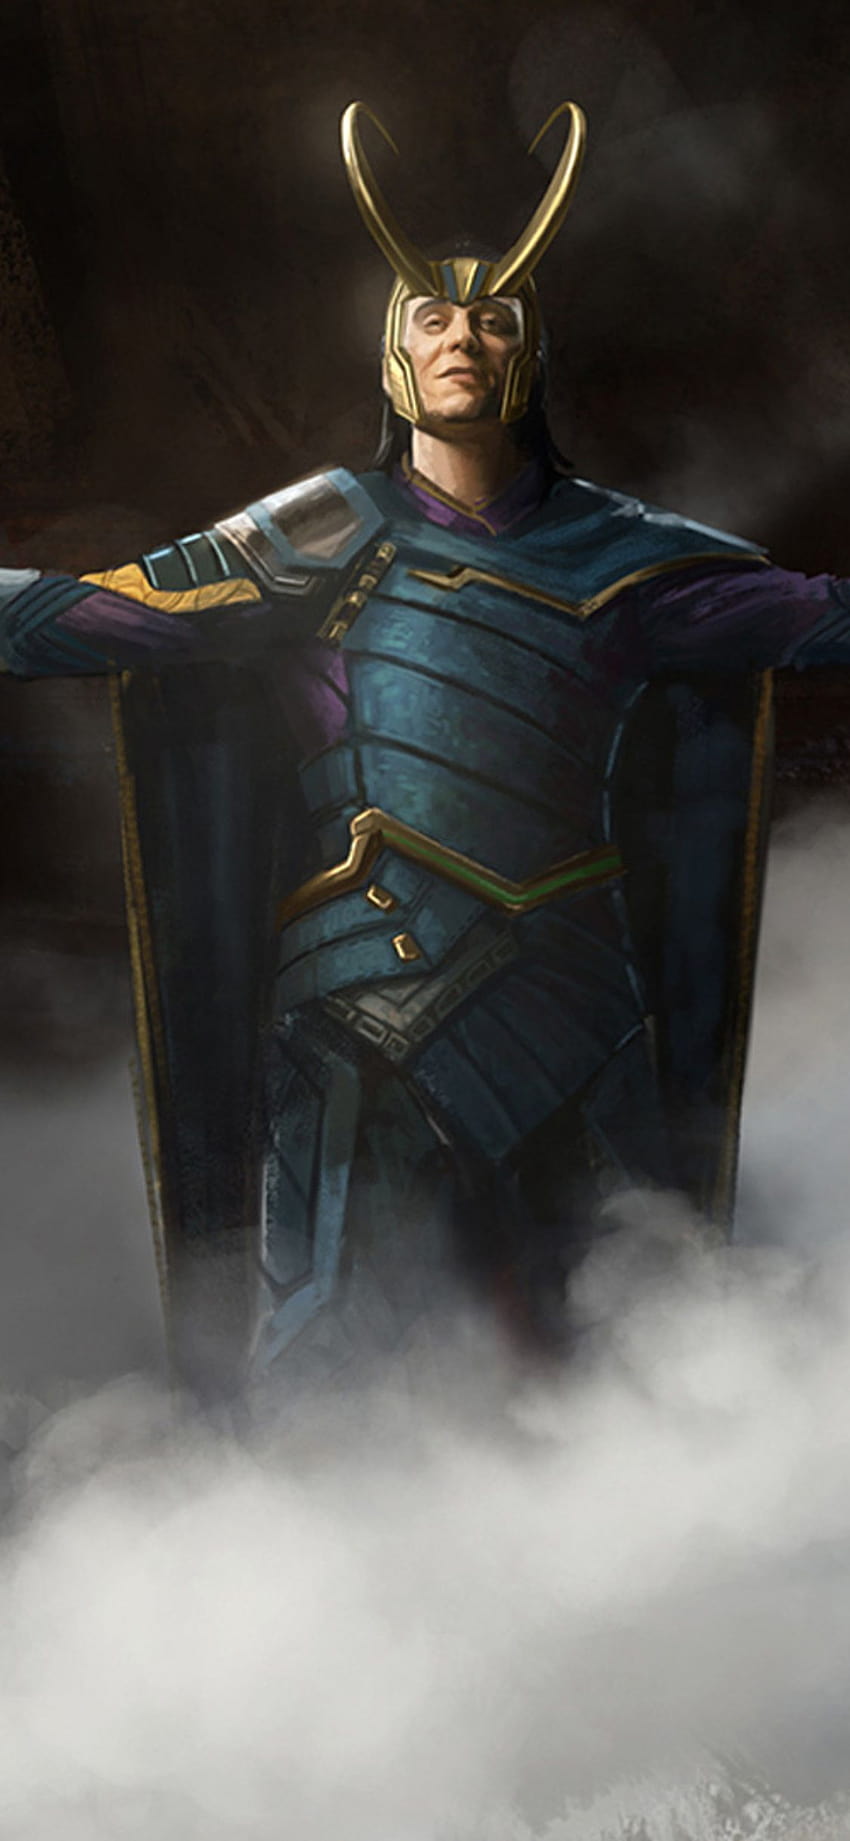 Loki for mobile phone, tablet, computer and other devices and . in 2021, marvel cinematic universe loki HD phone wallpaper